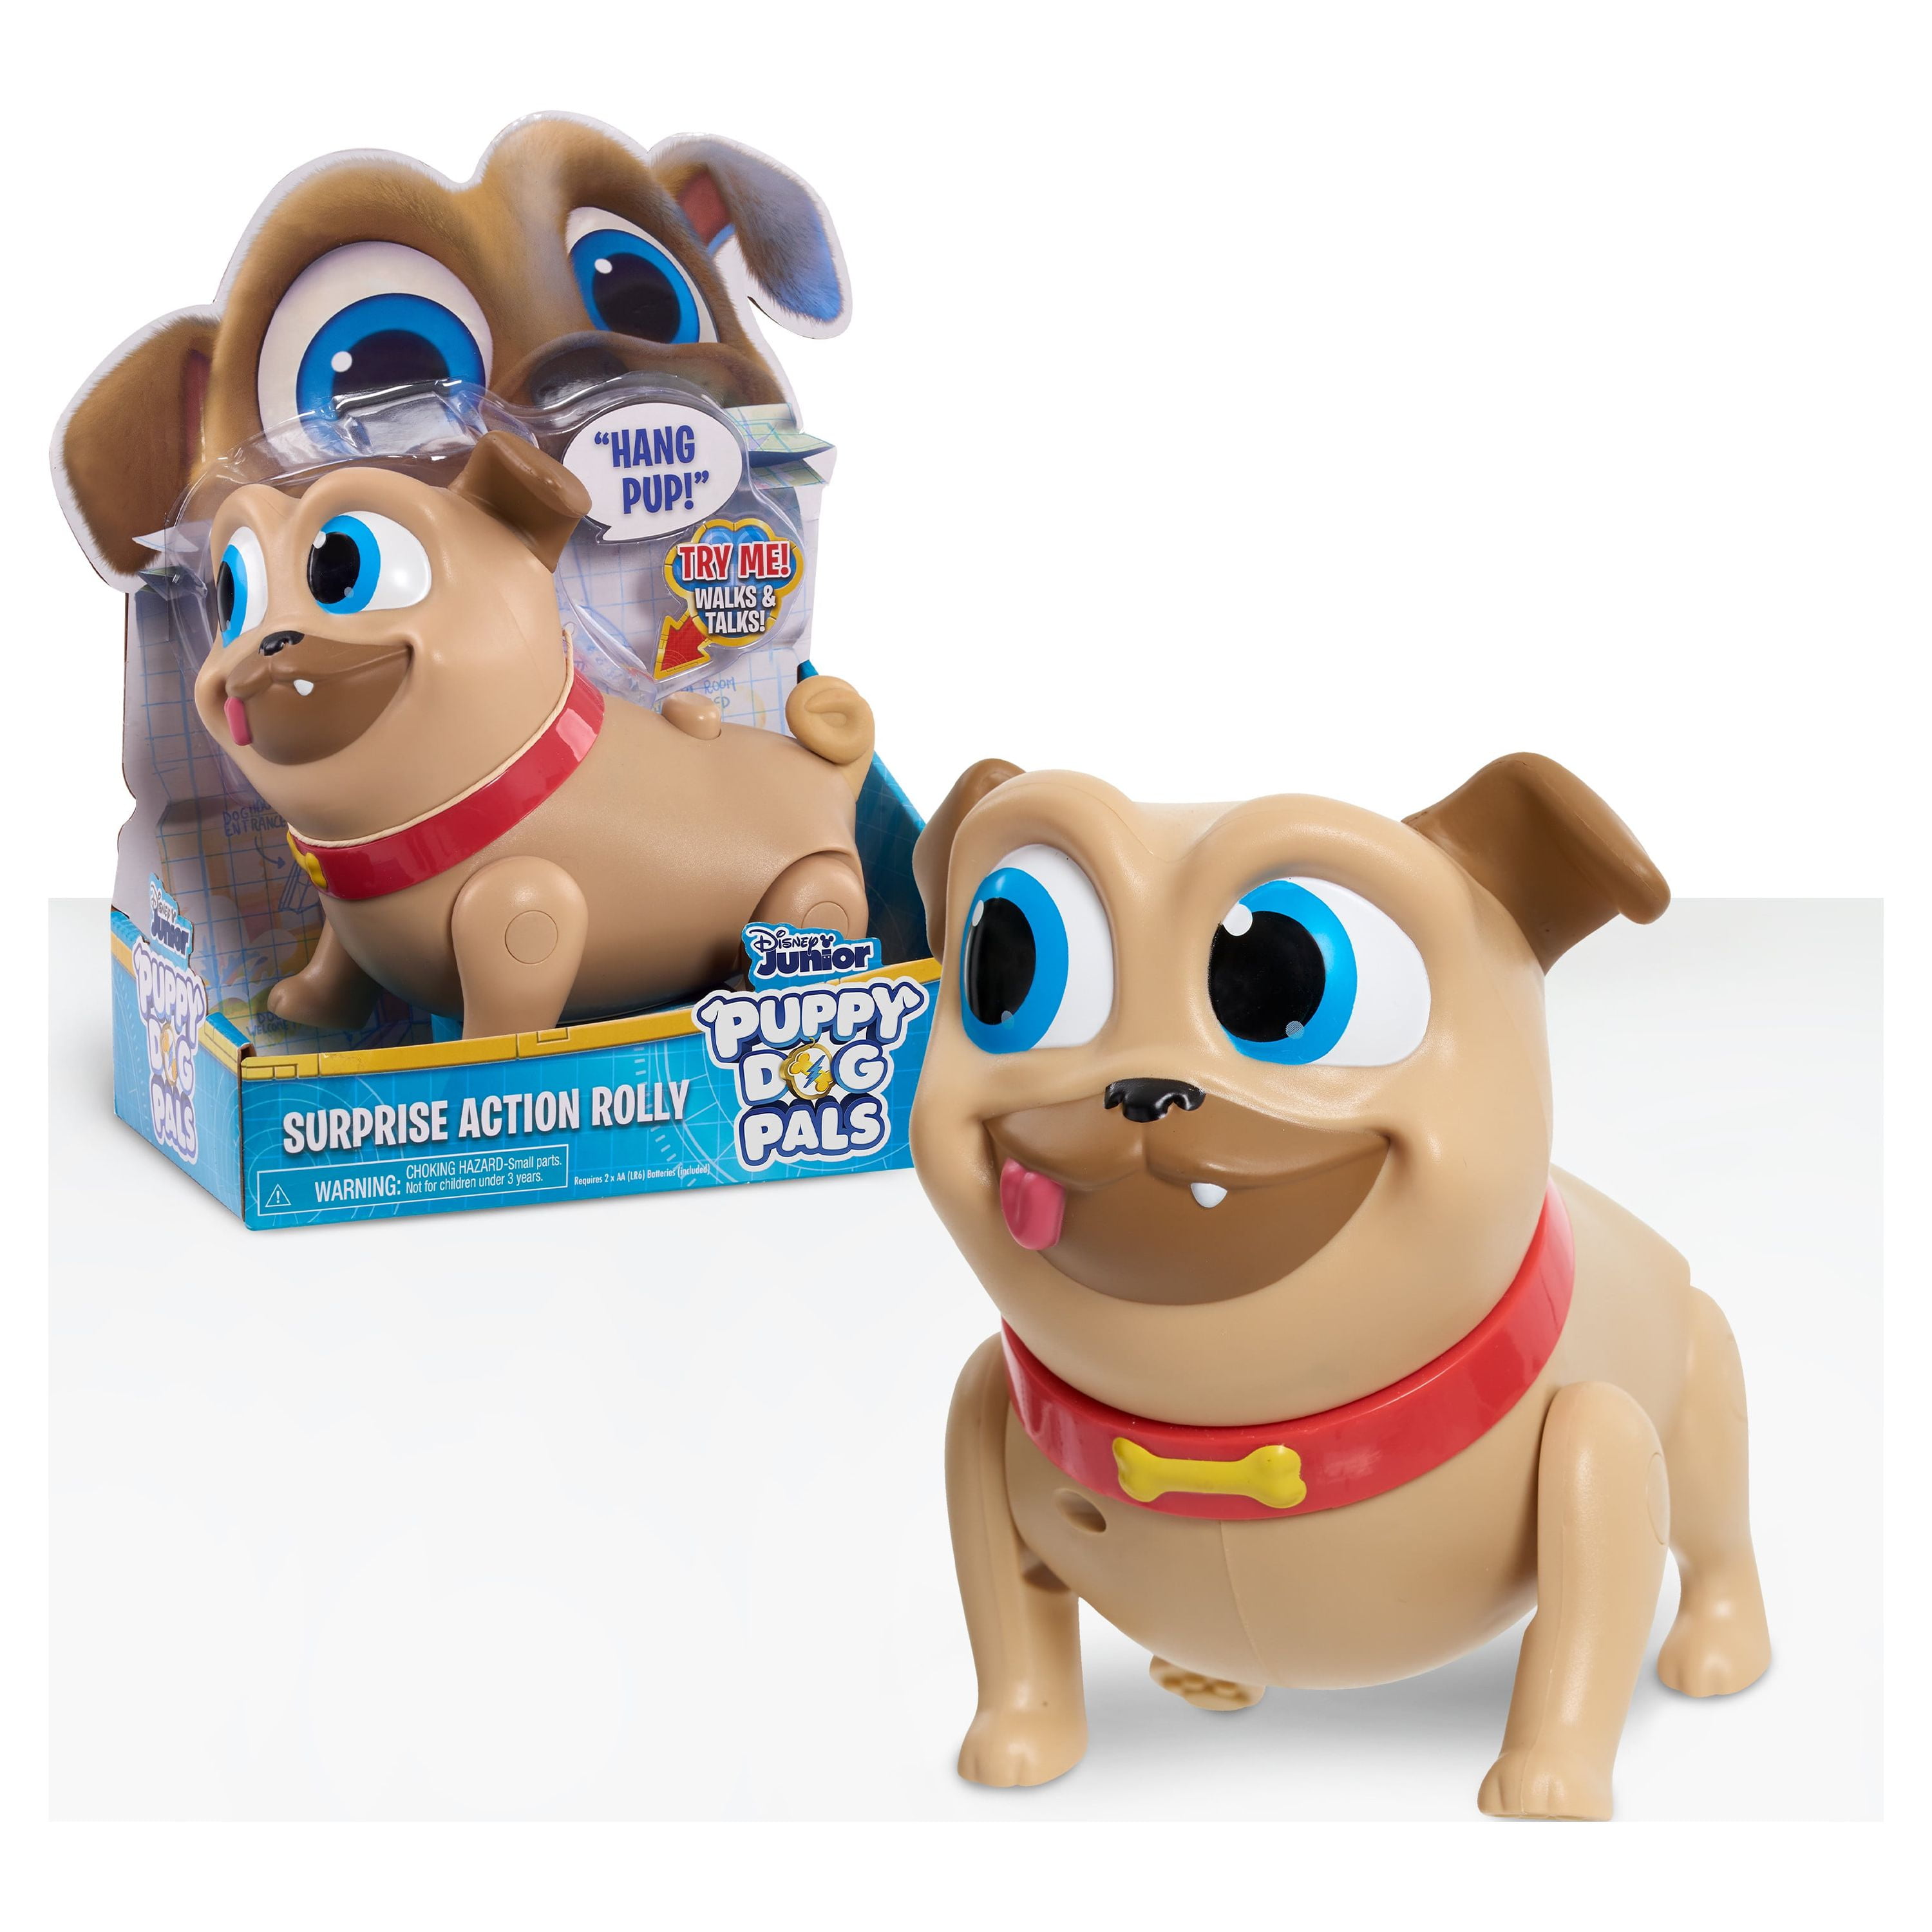 Puppy Dog Pals Surprise Action Figure, Rolly, Officially Licensed Kids Toys  for Ages 3 Up, Gifts and Presents 